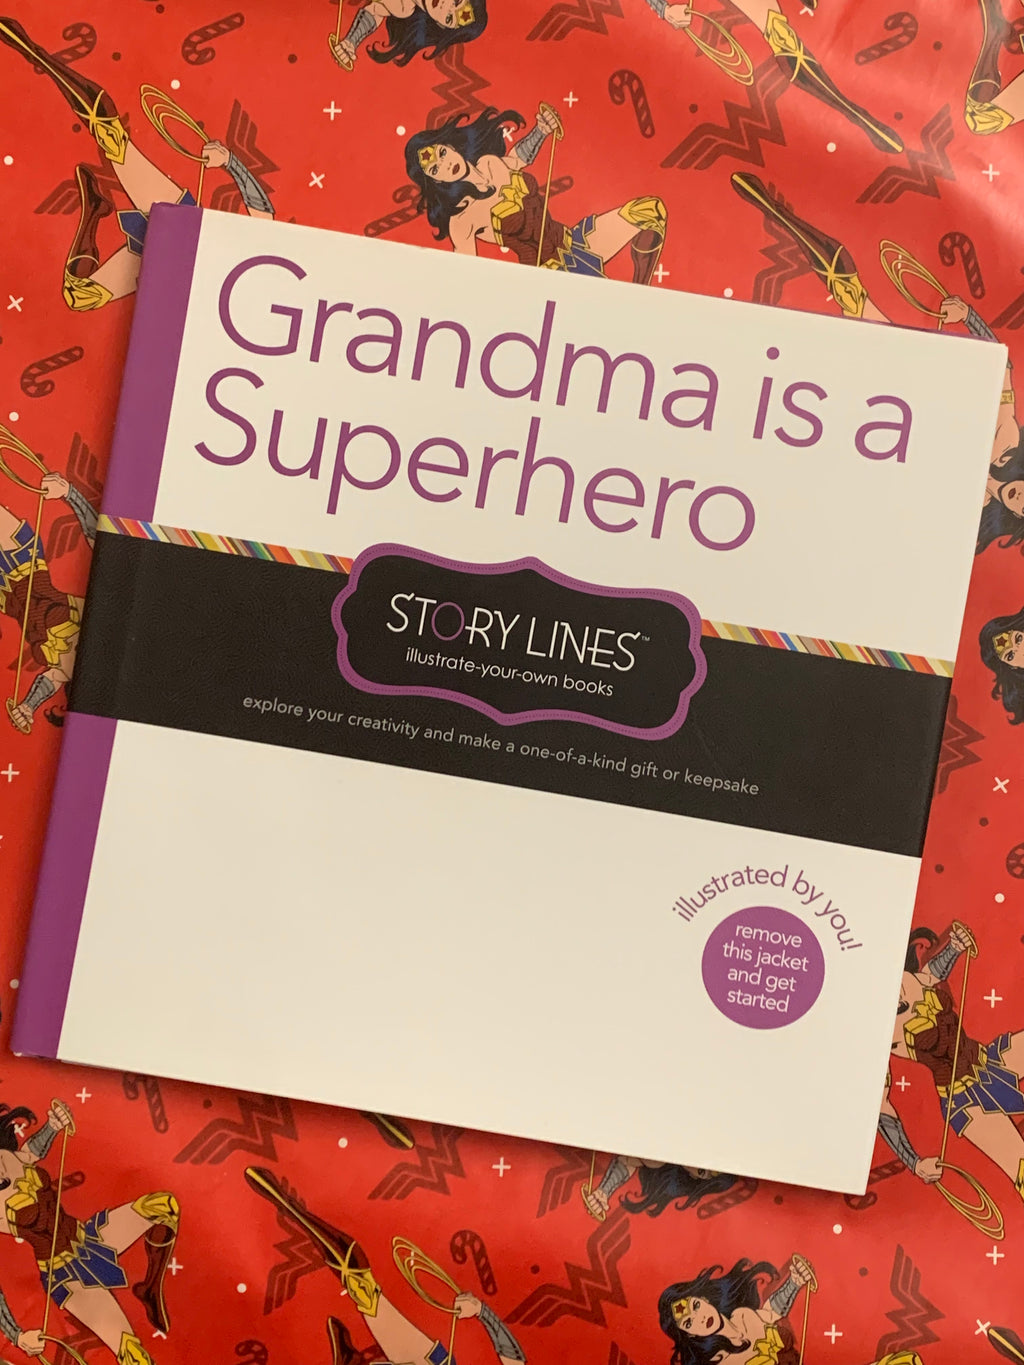 Story Lines: Grandma is a Superhero — An illustrate-your-own book for kids